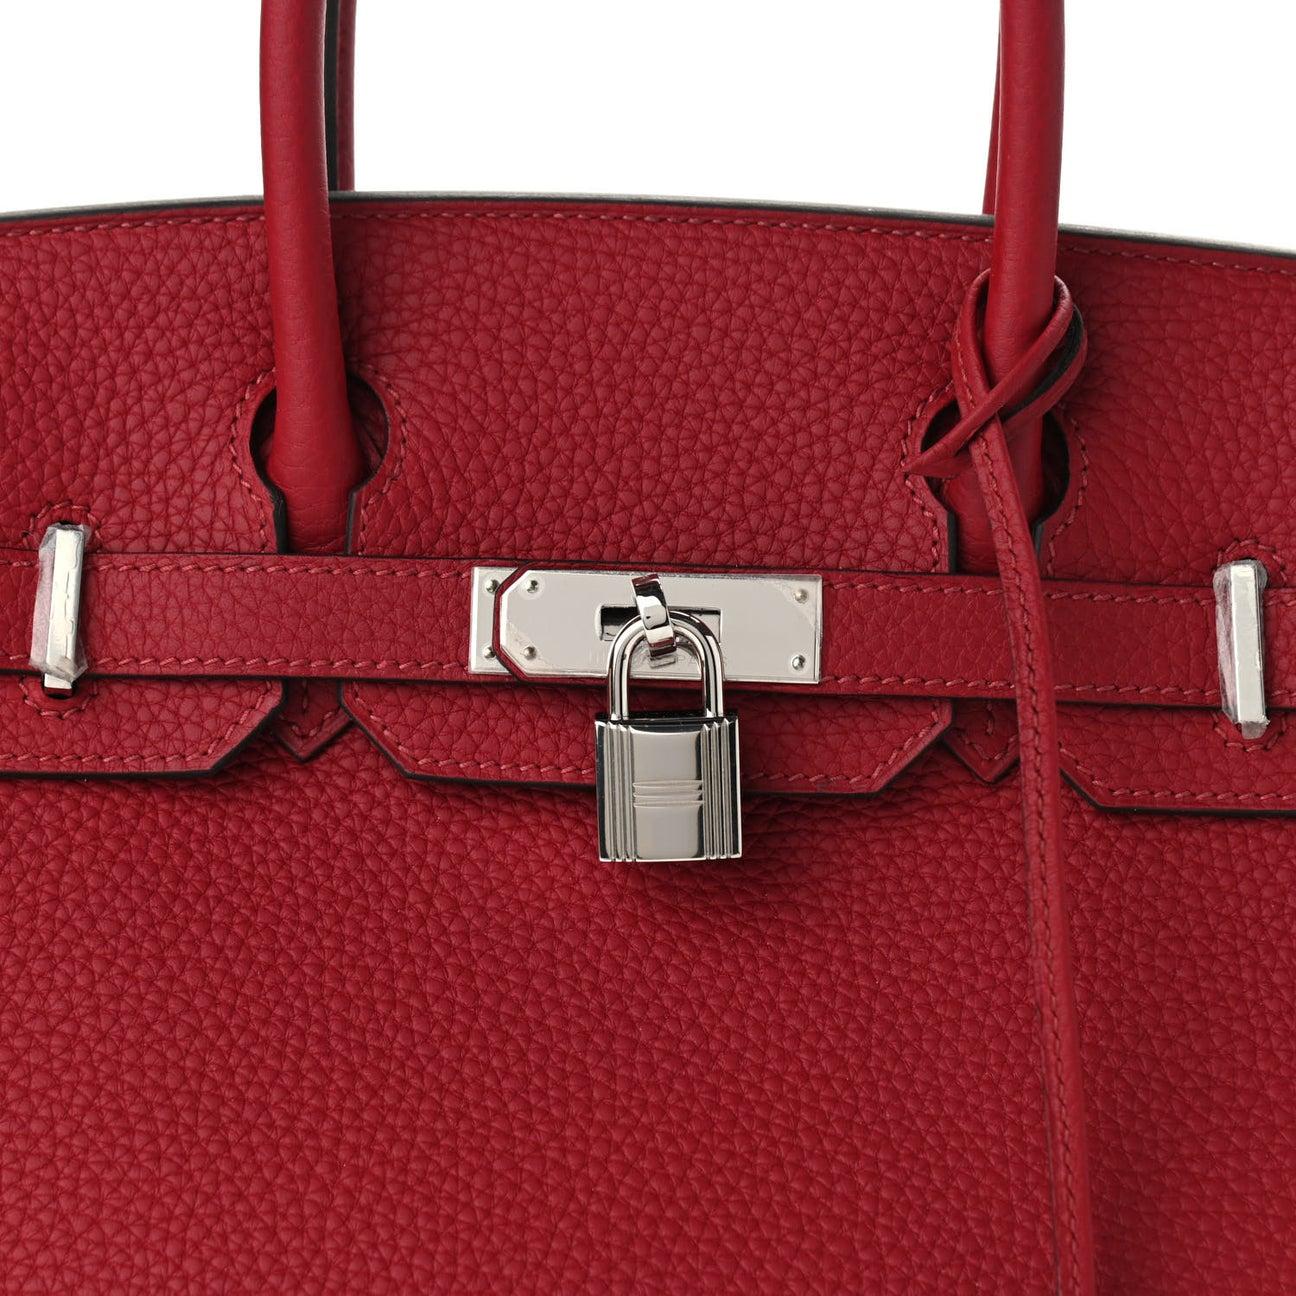 New Condition
From 2016 Collection
Rouge Grenat
Taurillon Clemence Leather
Palladium Tone Hardware
Measures 11.75